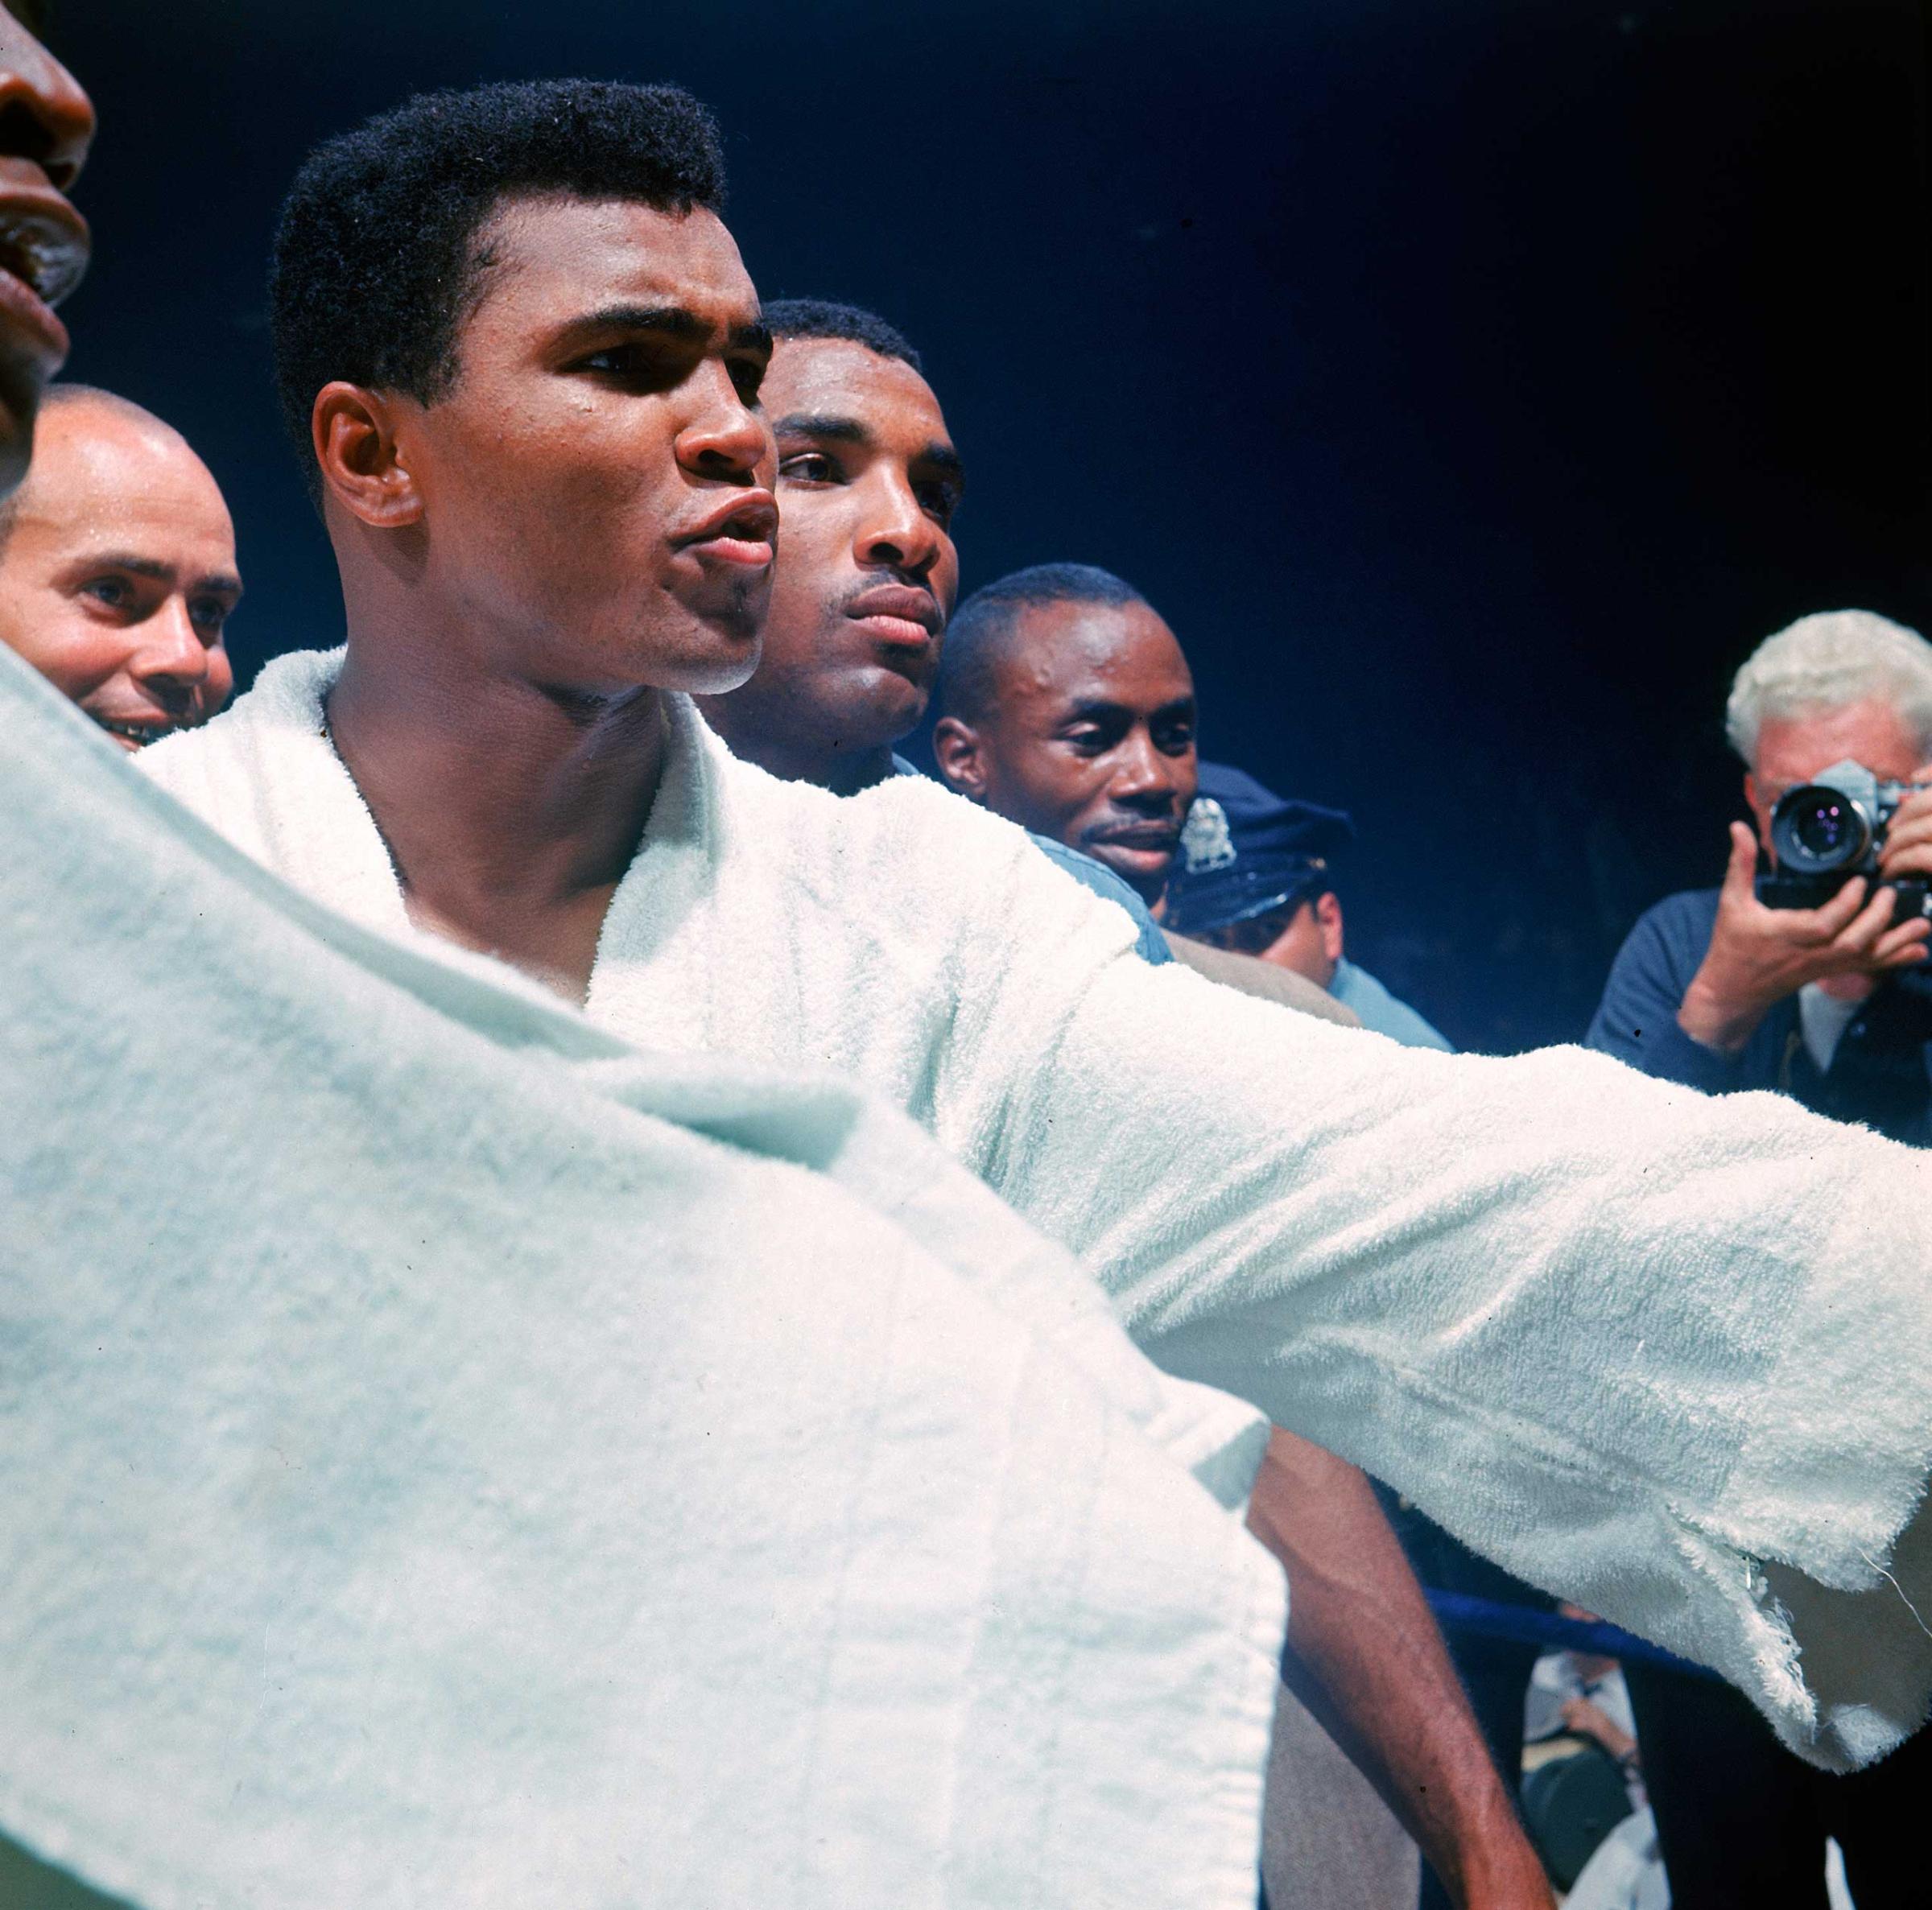 Muhammad Ali after his title defense against Sonny Liston (the "Phantom Punch" bout), Lewiston, Maine, 1965.